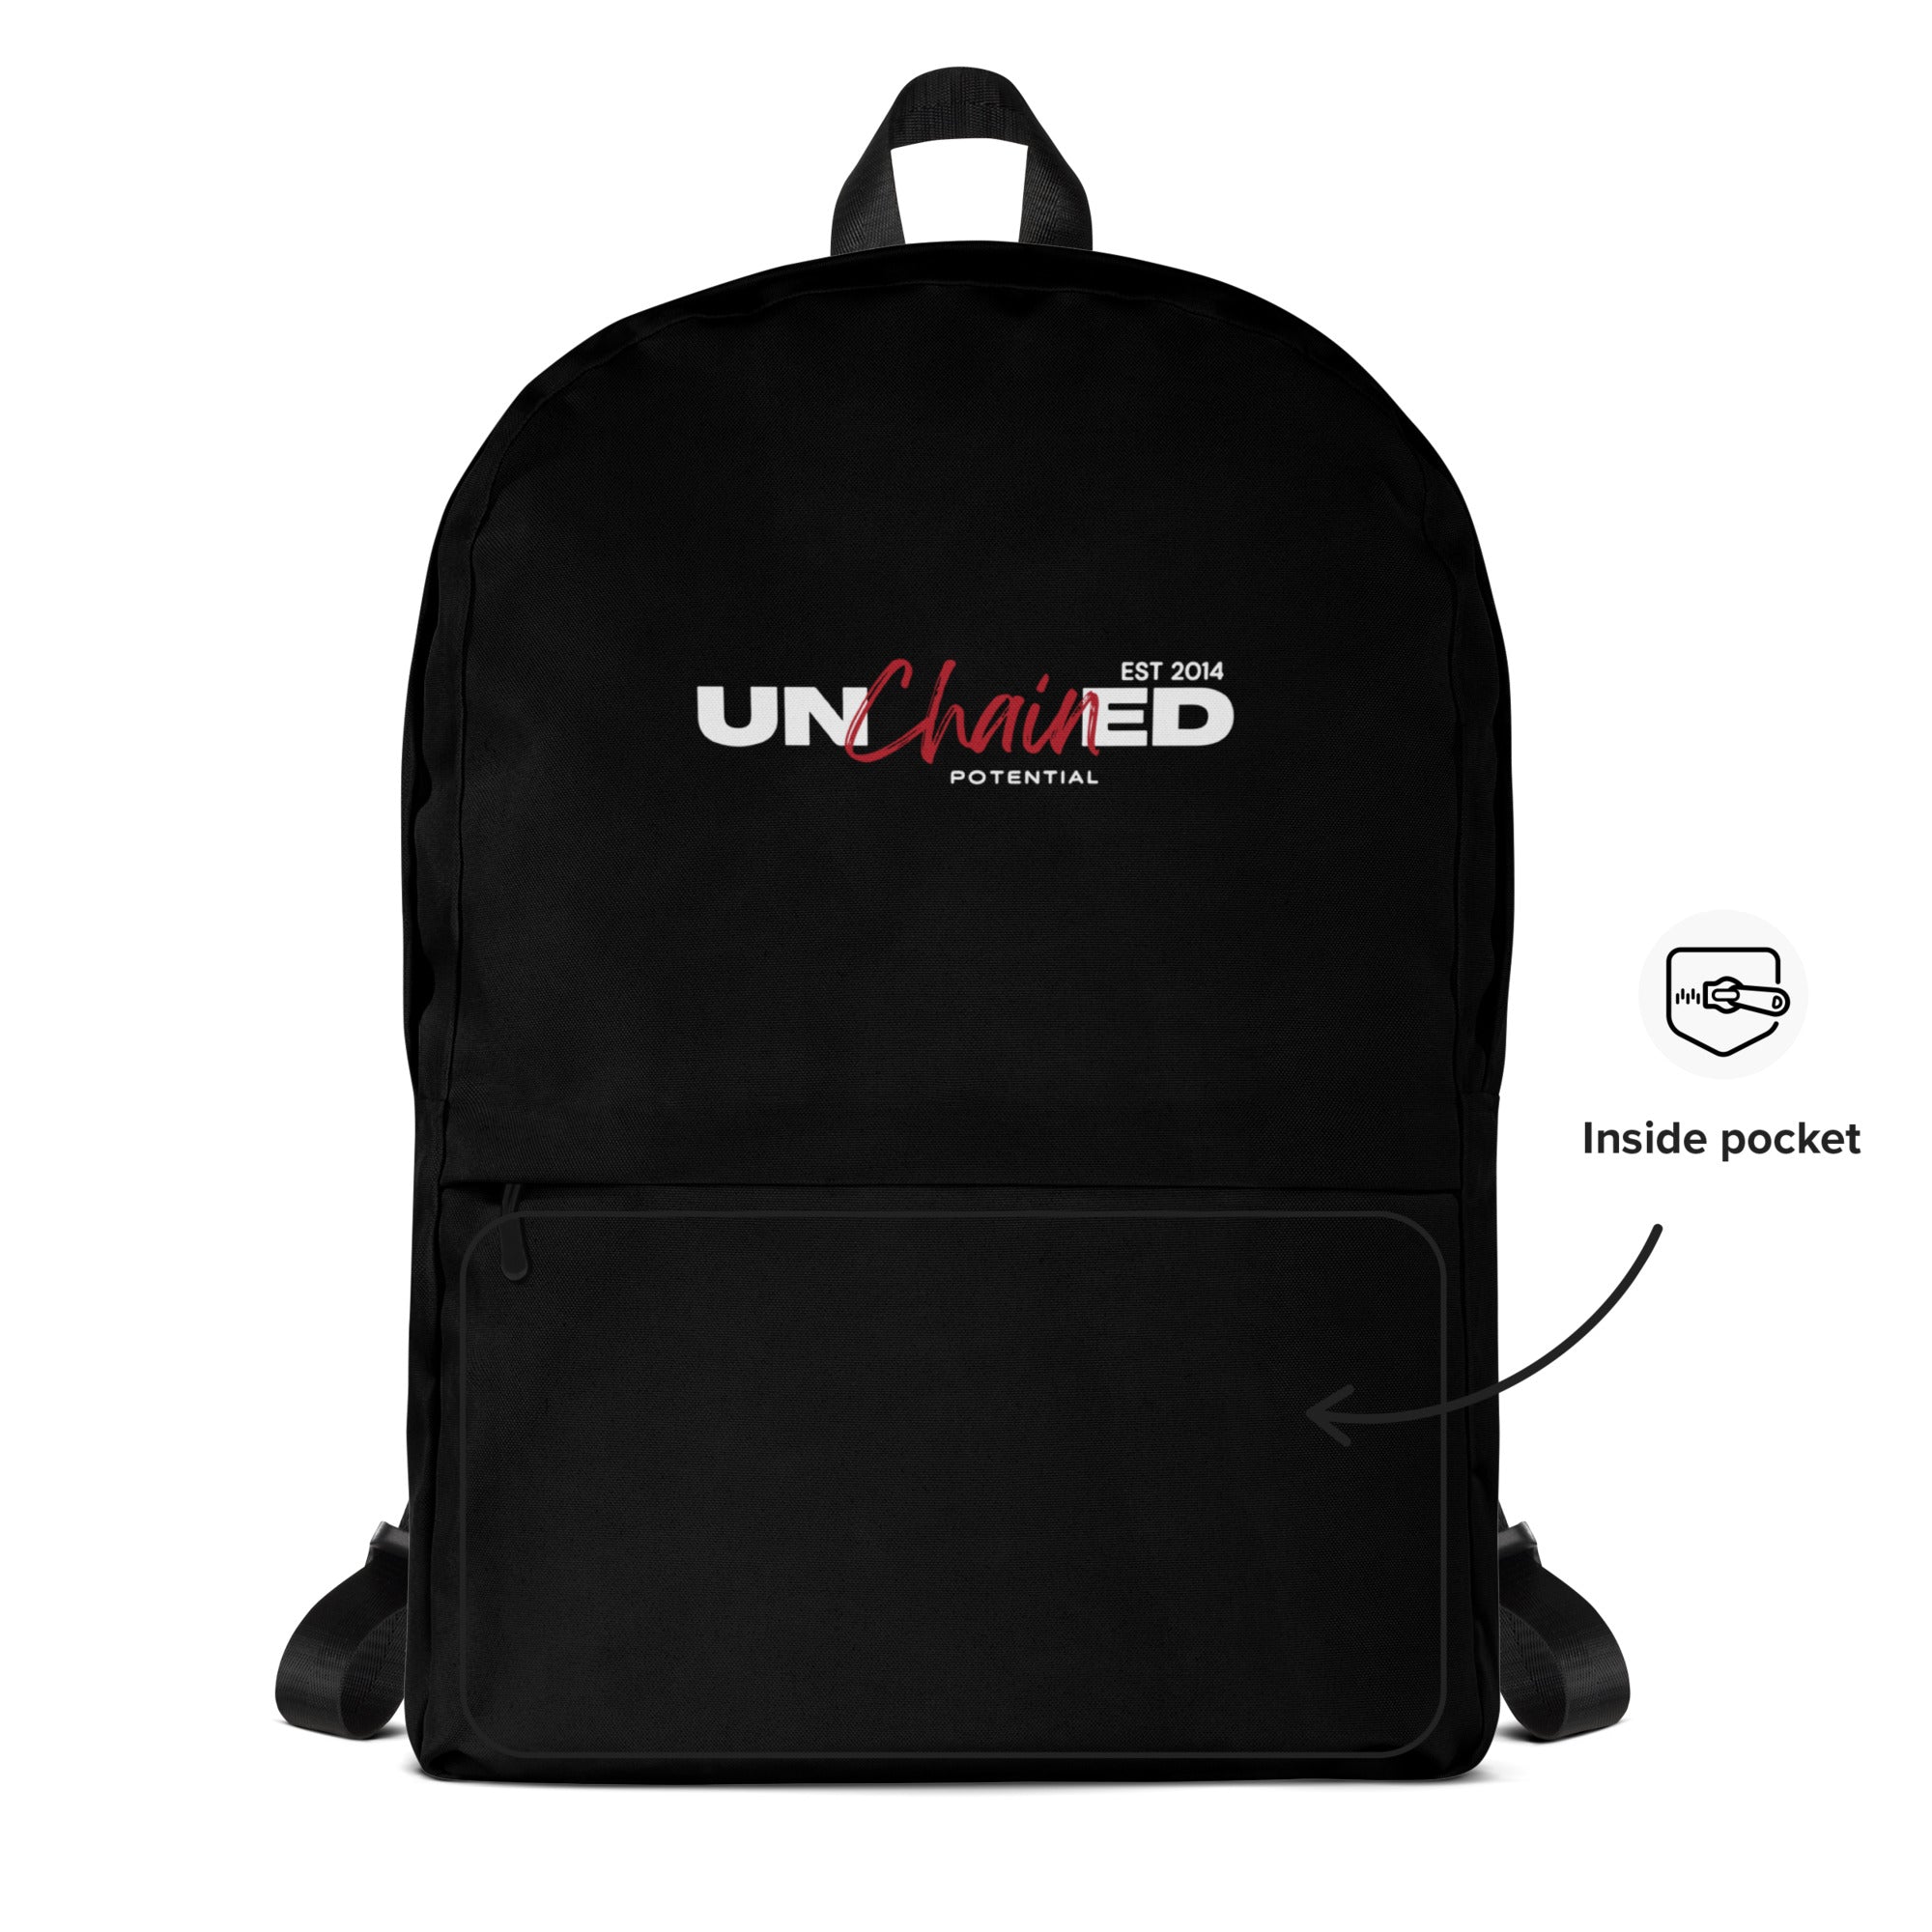 Unchained Potential Backpack